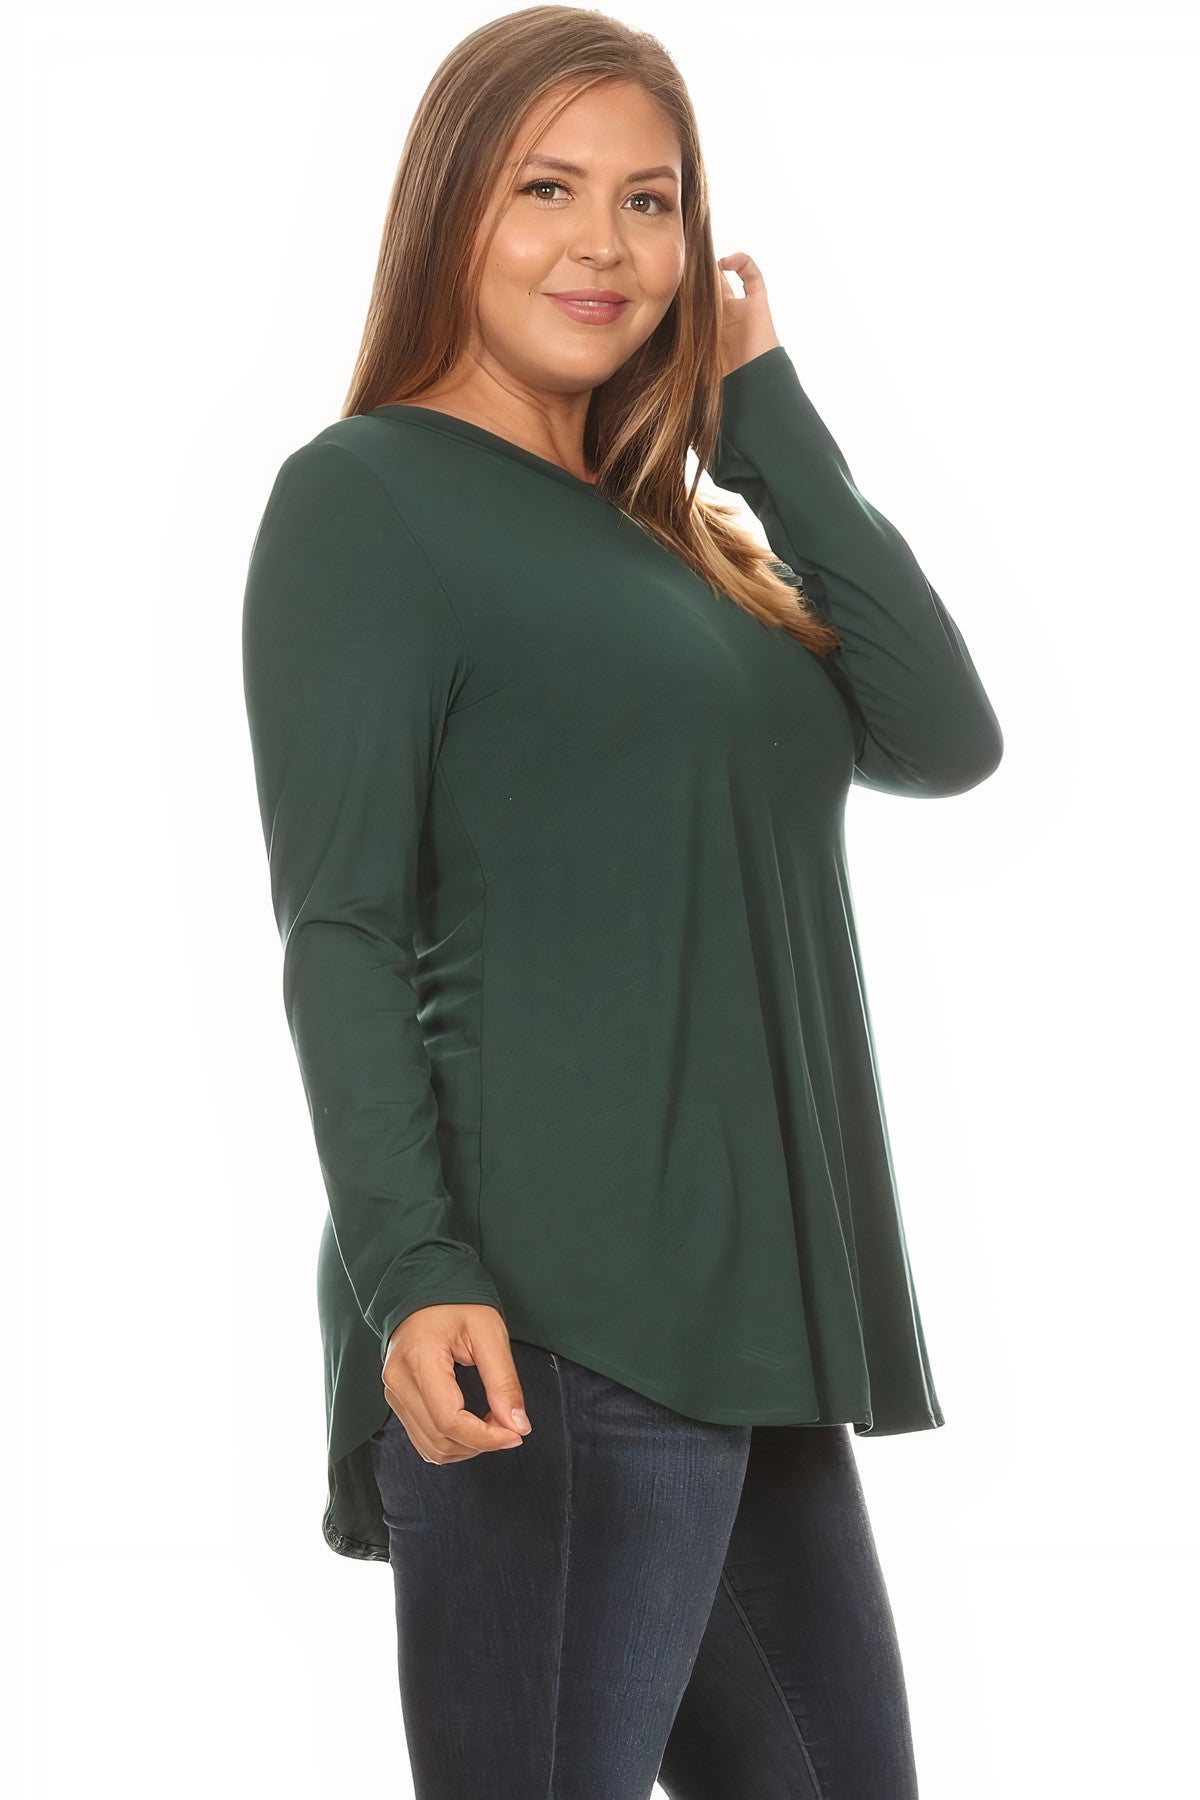 2270RSX - PLUS SIZE Crew Neck Long Sleeve Top with Curved Hem | Made in USA | Azules Wholesale